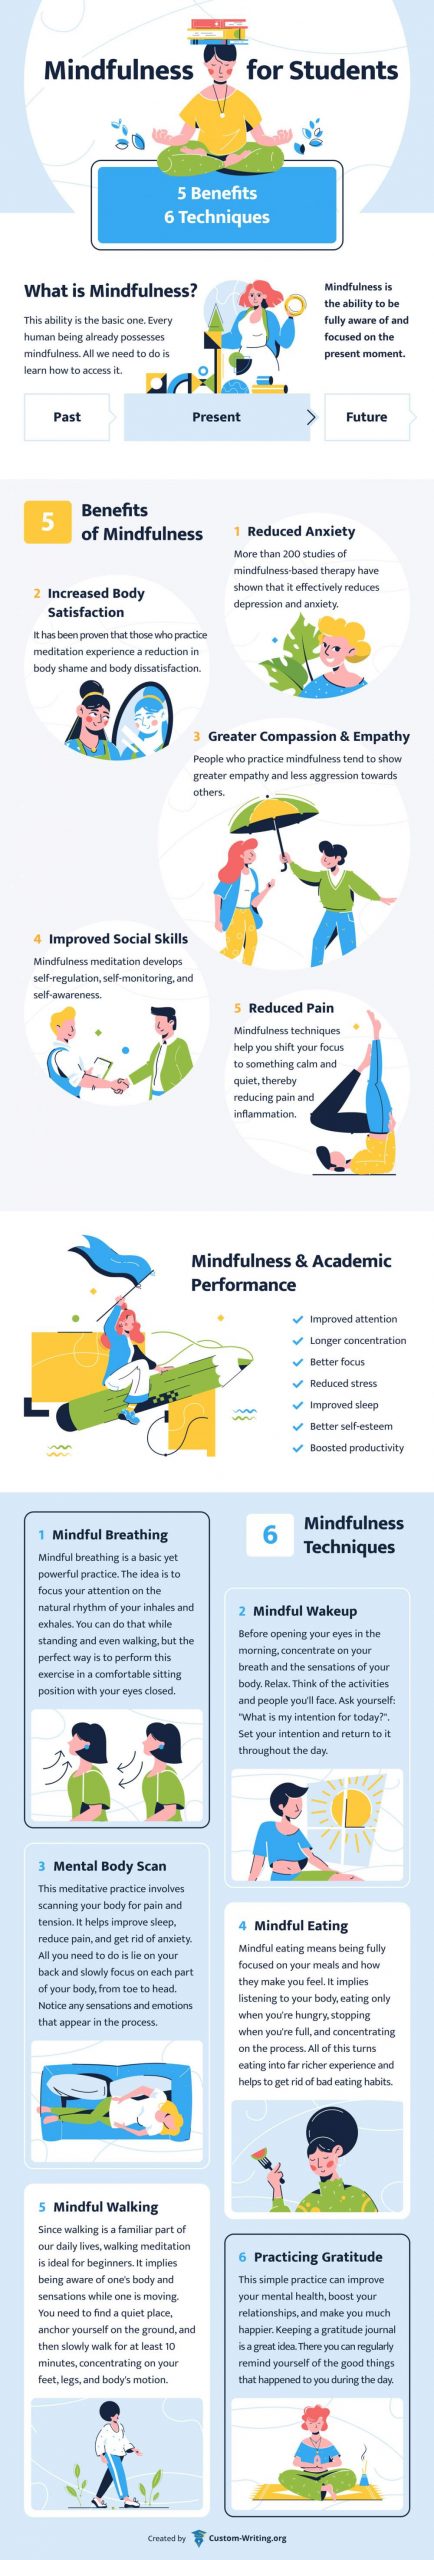 Mindfulness-for-Students